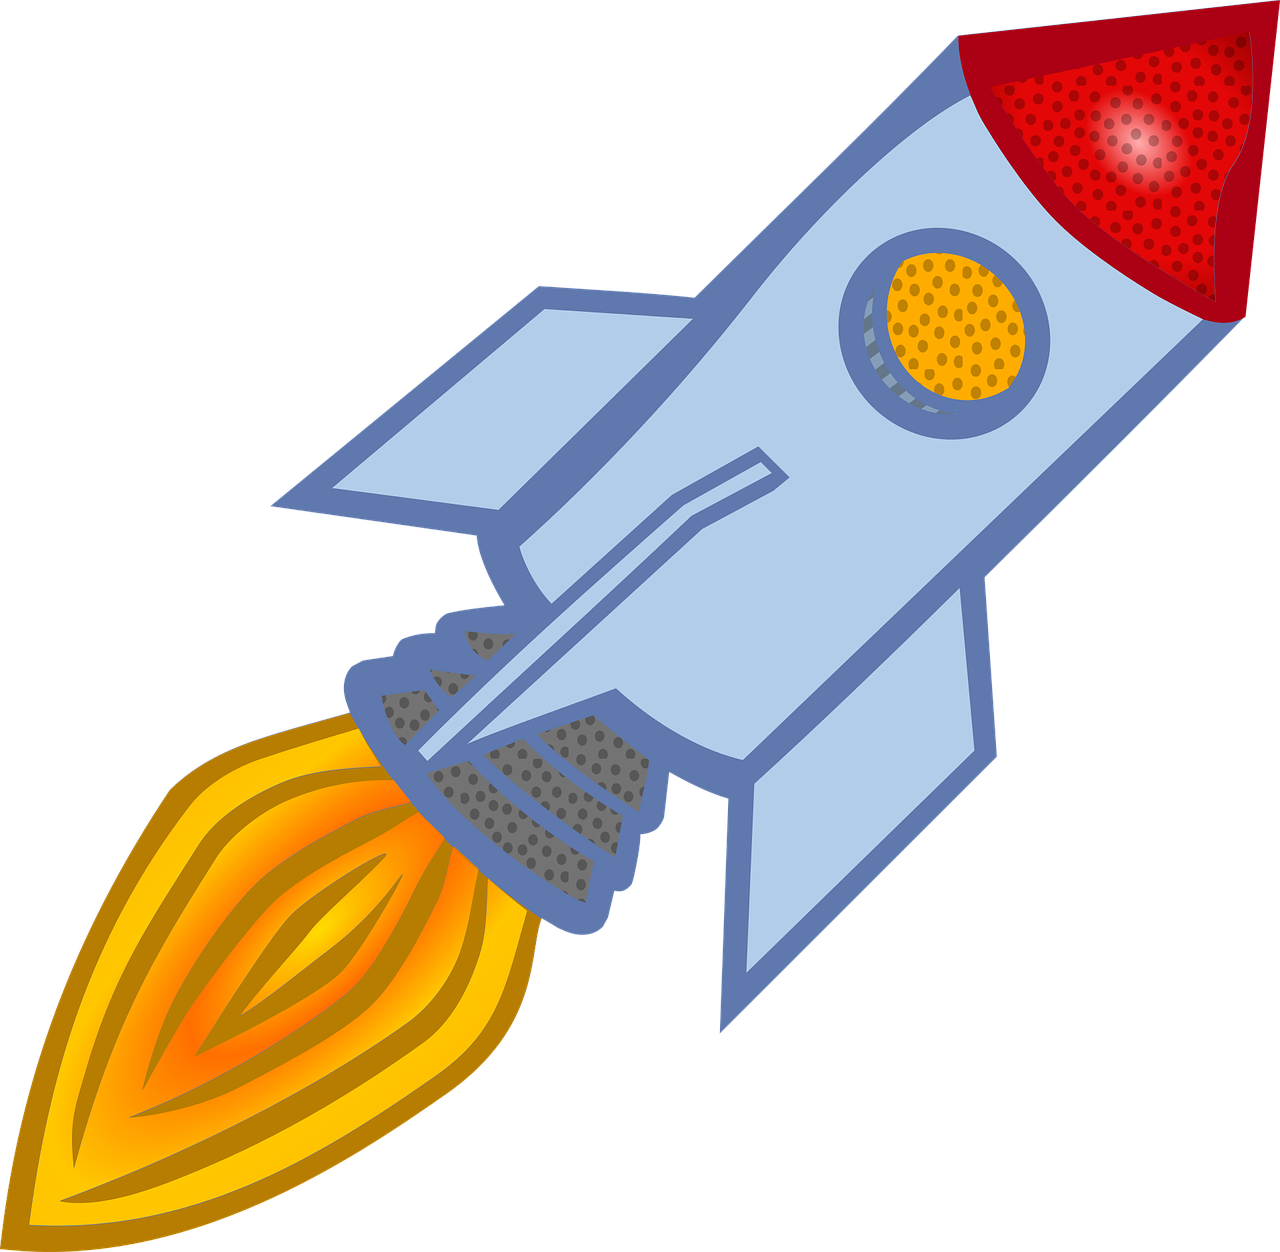 a cartoon rocket ship flying through the air, by Matt Stewart, pixabay, space art, !!! very coherent!!! vector art, on a flat color black background, the torch we all must hold, starting engines nitro jet drive